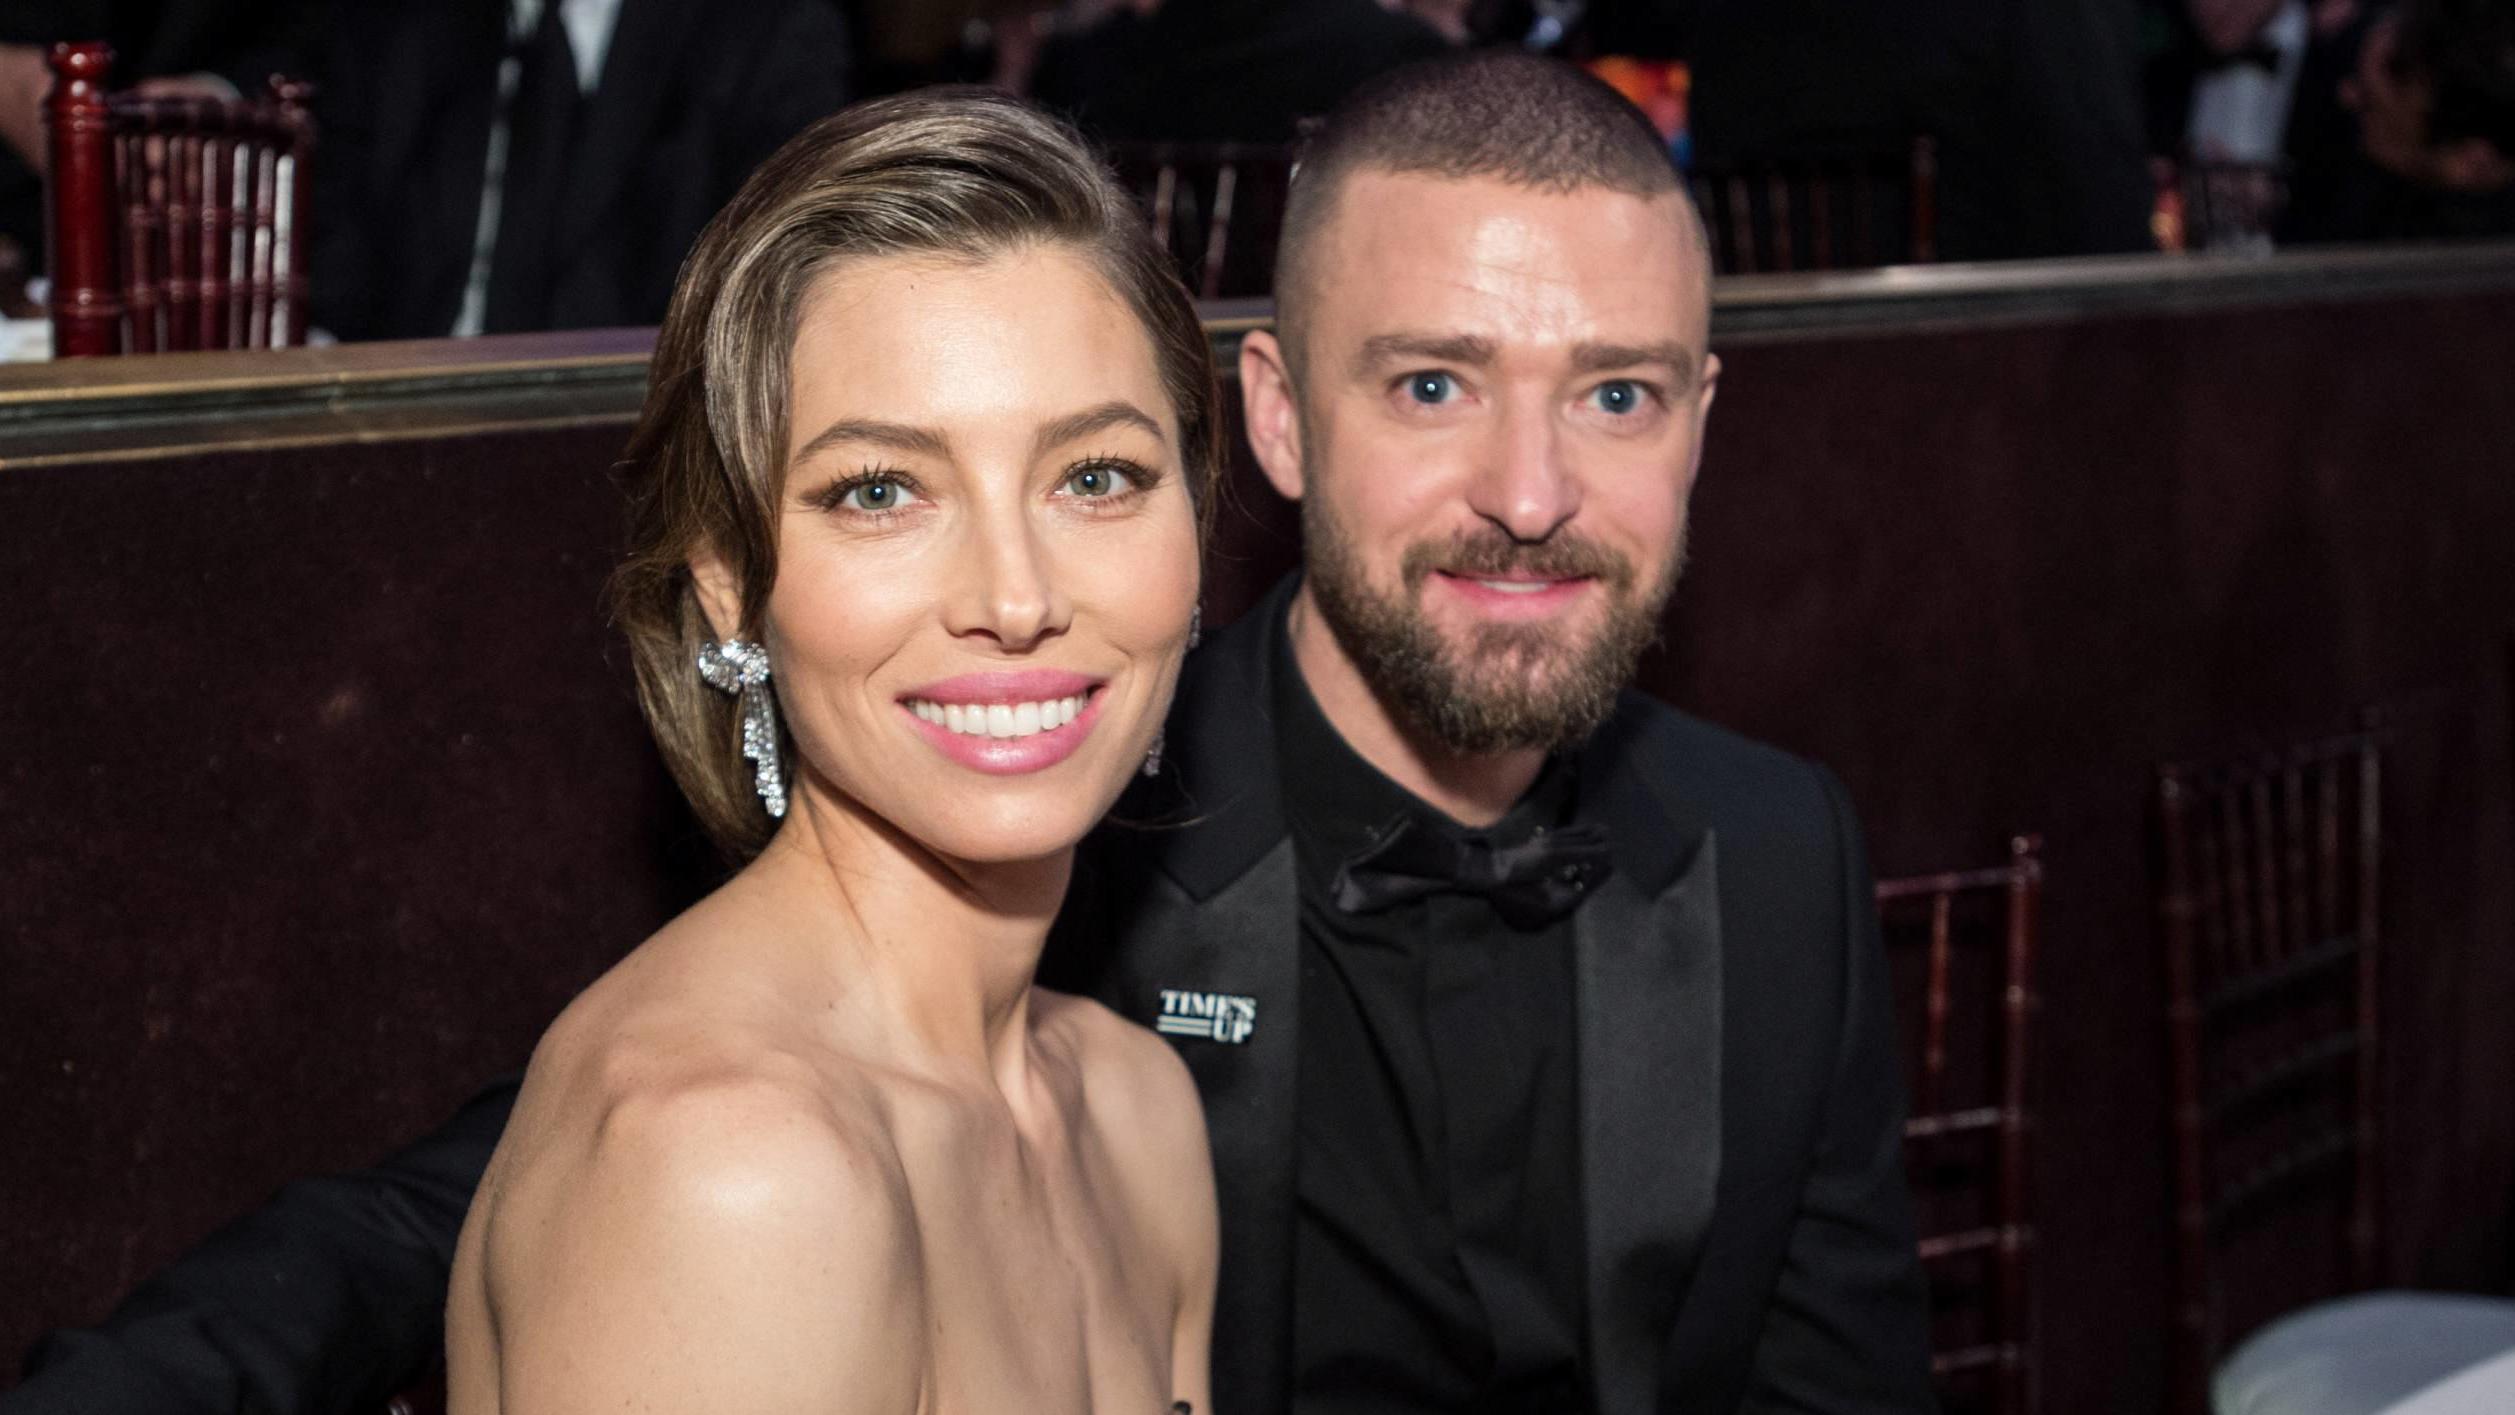 Nominated for BEST PERFORMANCE BY AN ACTRESS IN A LIMITED SERIES OR A MOTION PICTURE MADE FOR TELEVISION for her role in The Sinner, actress Jessica Biel and husband Justin Timberlake attend the 75th Annual Golden Globes Awards at the Beverly Hilton 